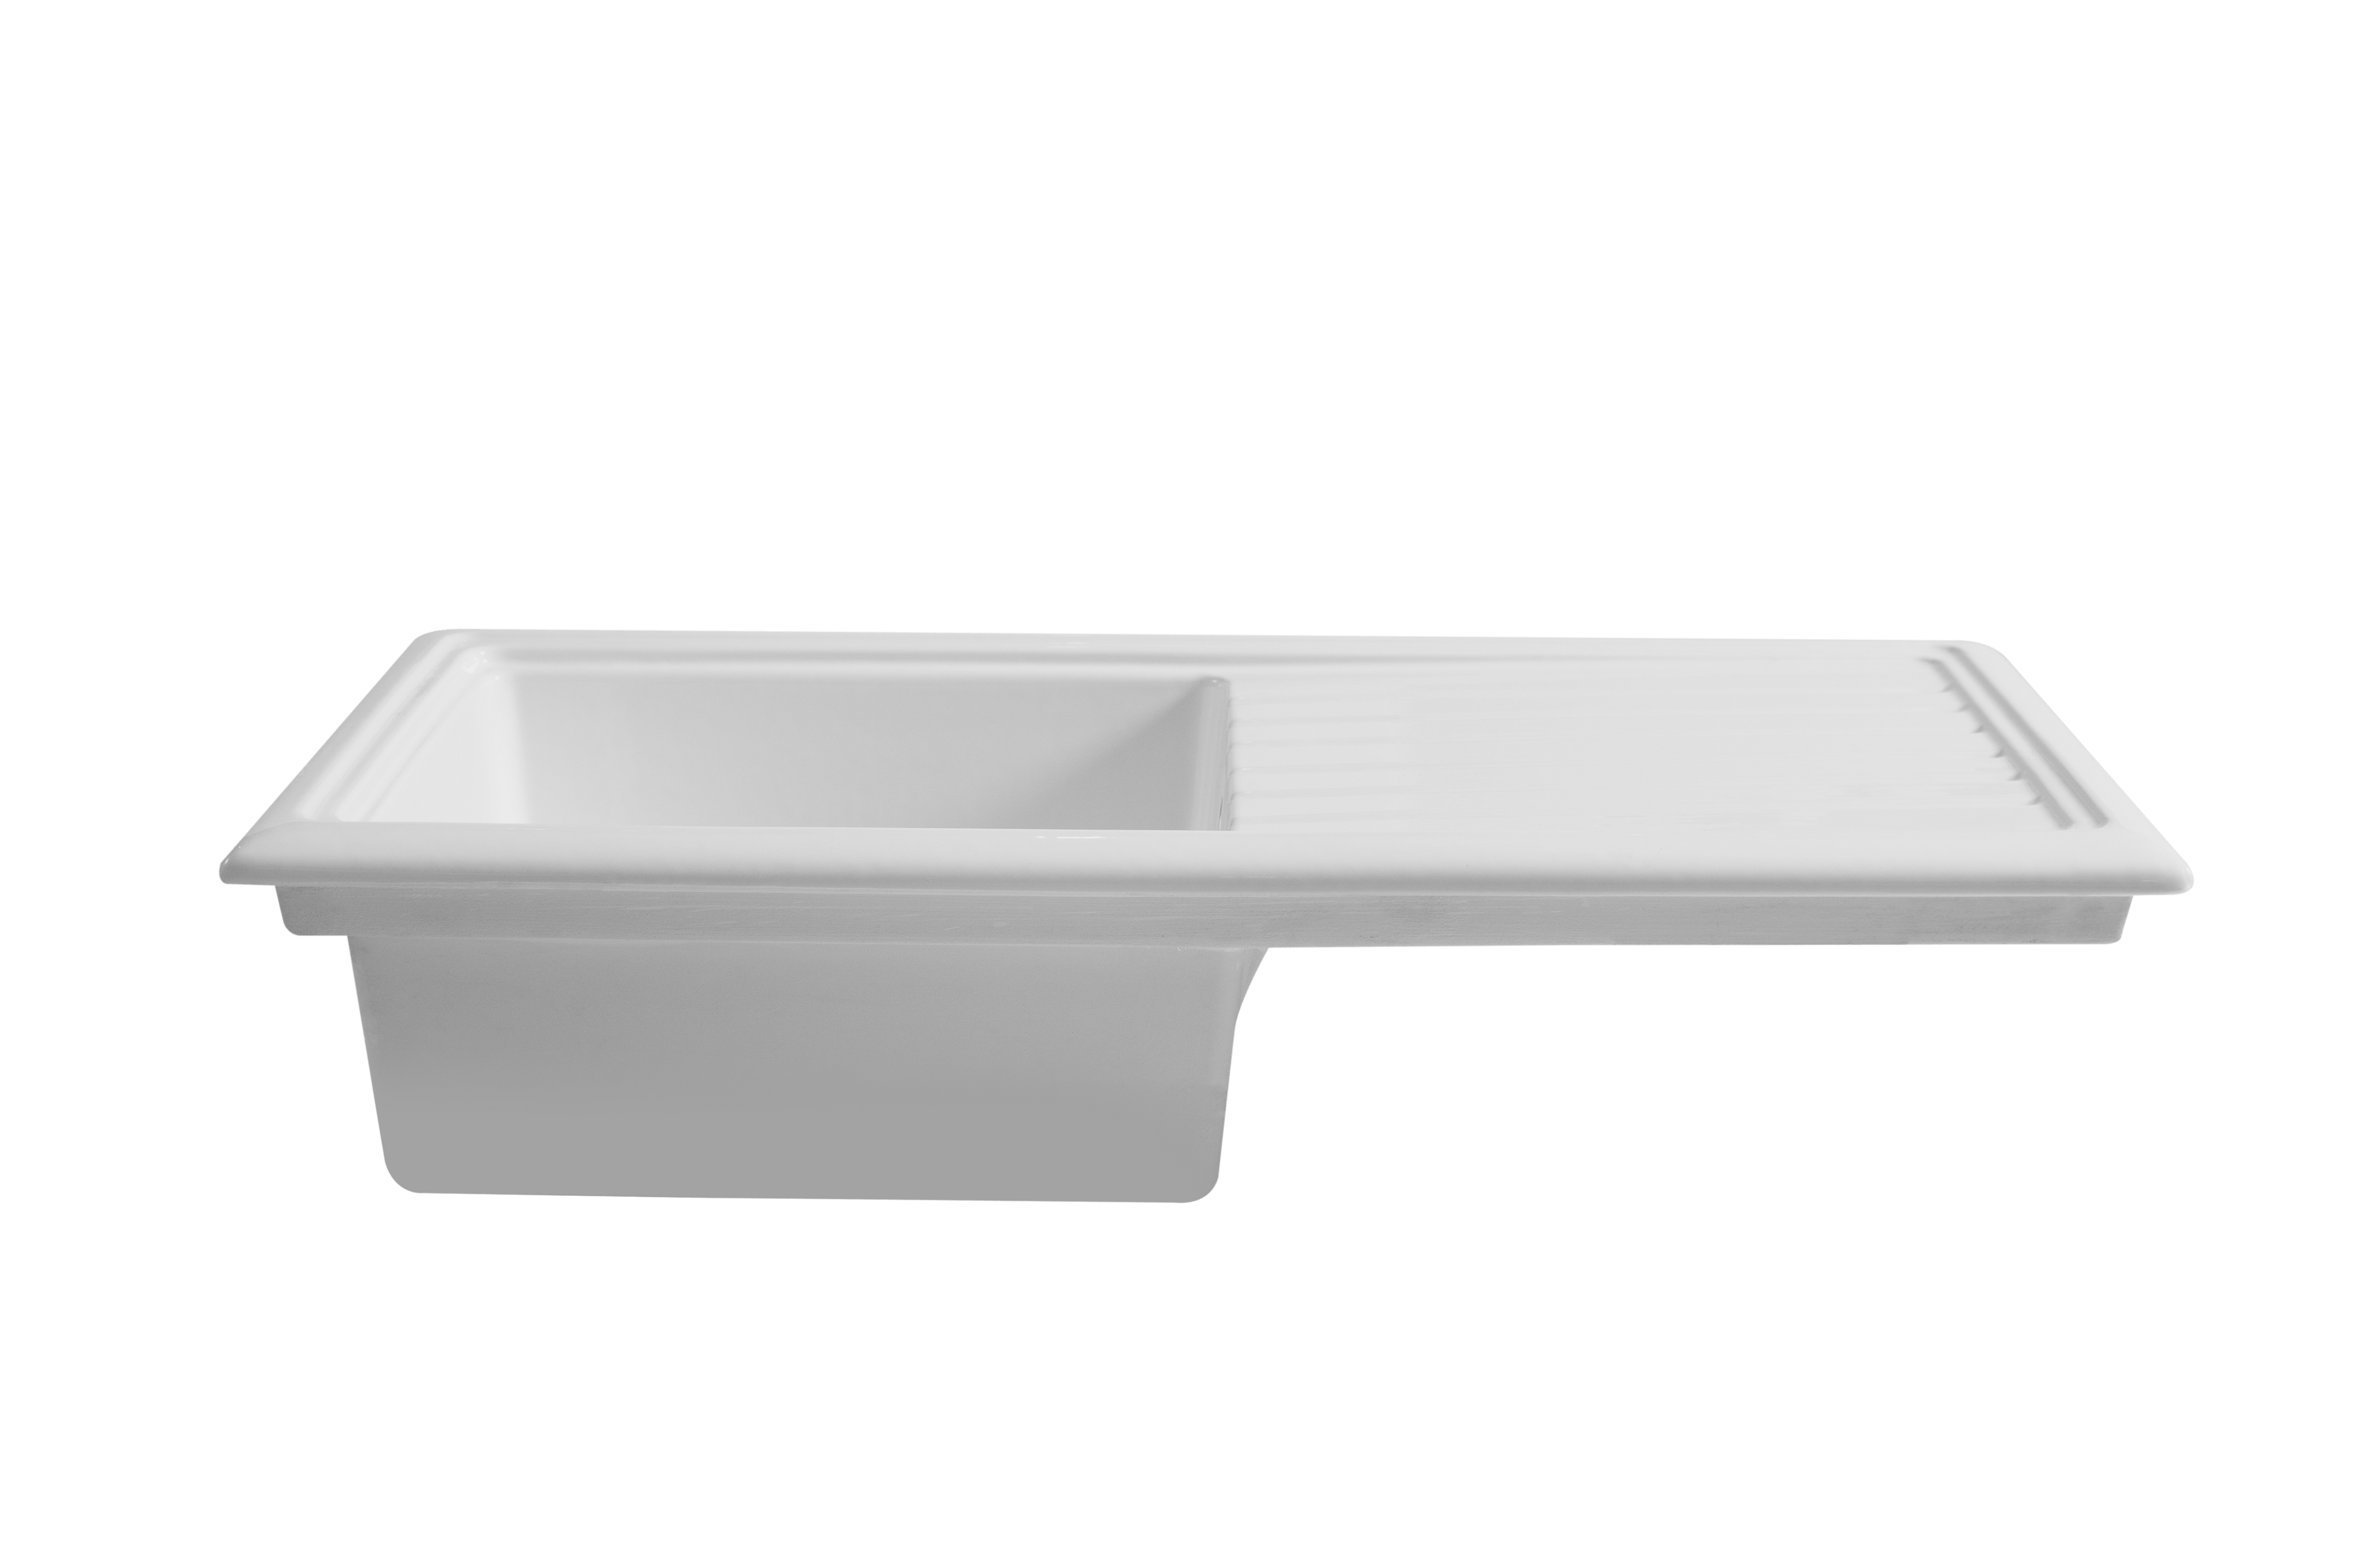 ceramic kitchen sink with 2 tap holes